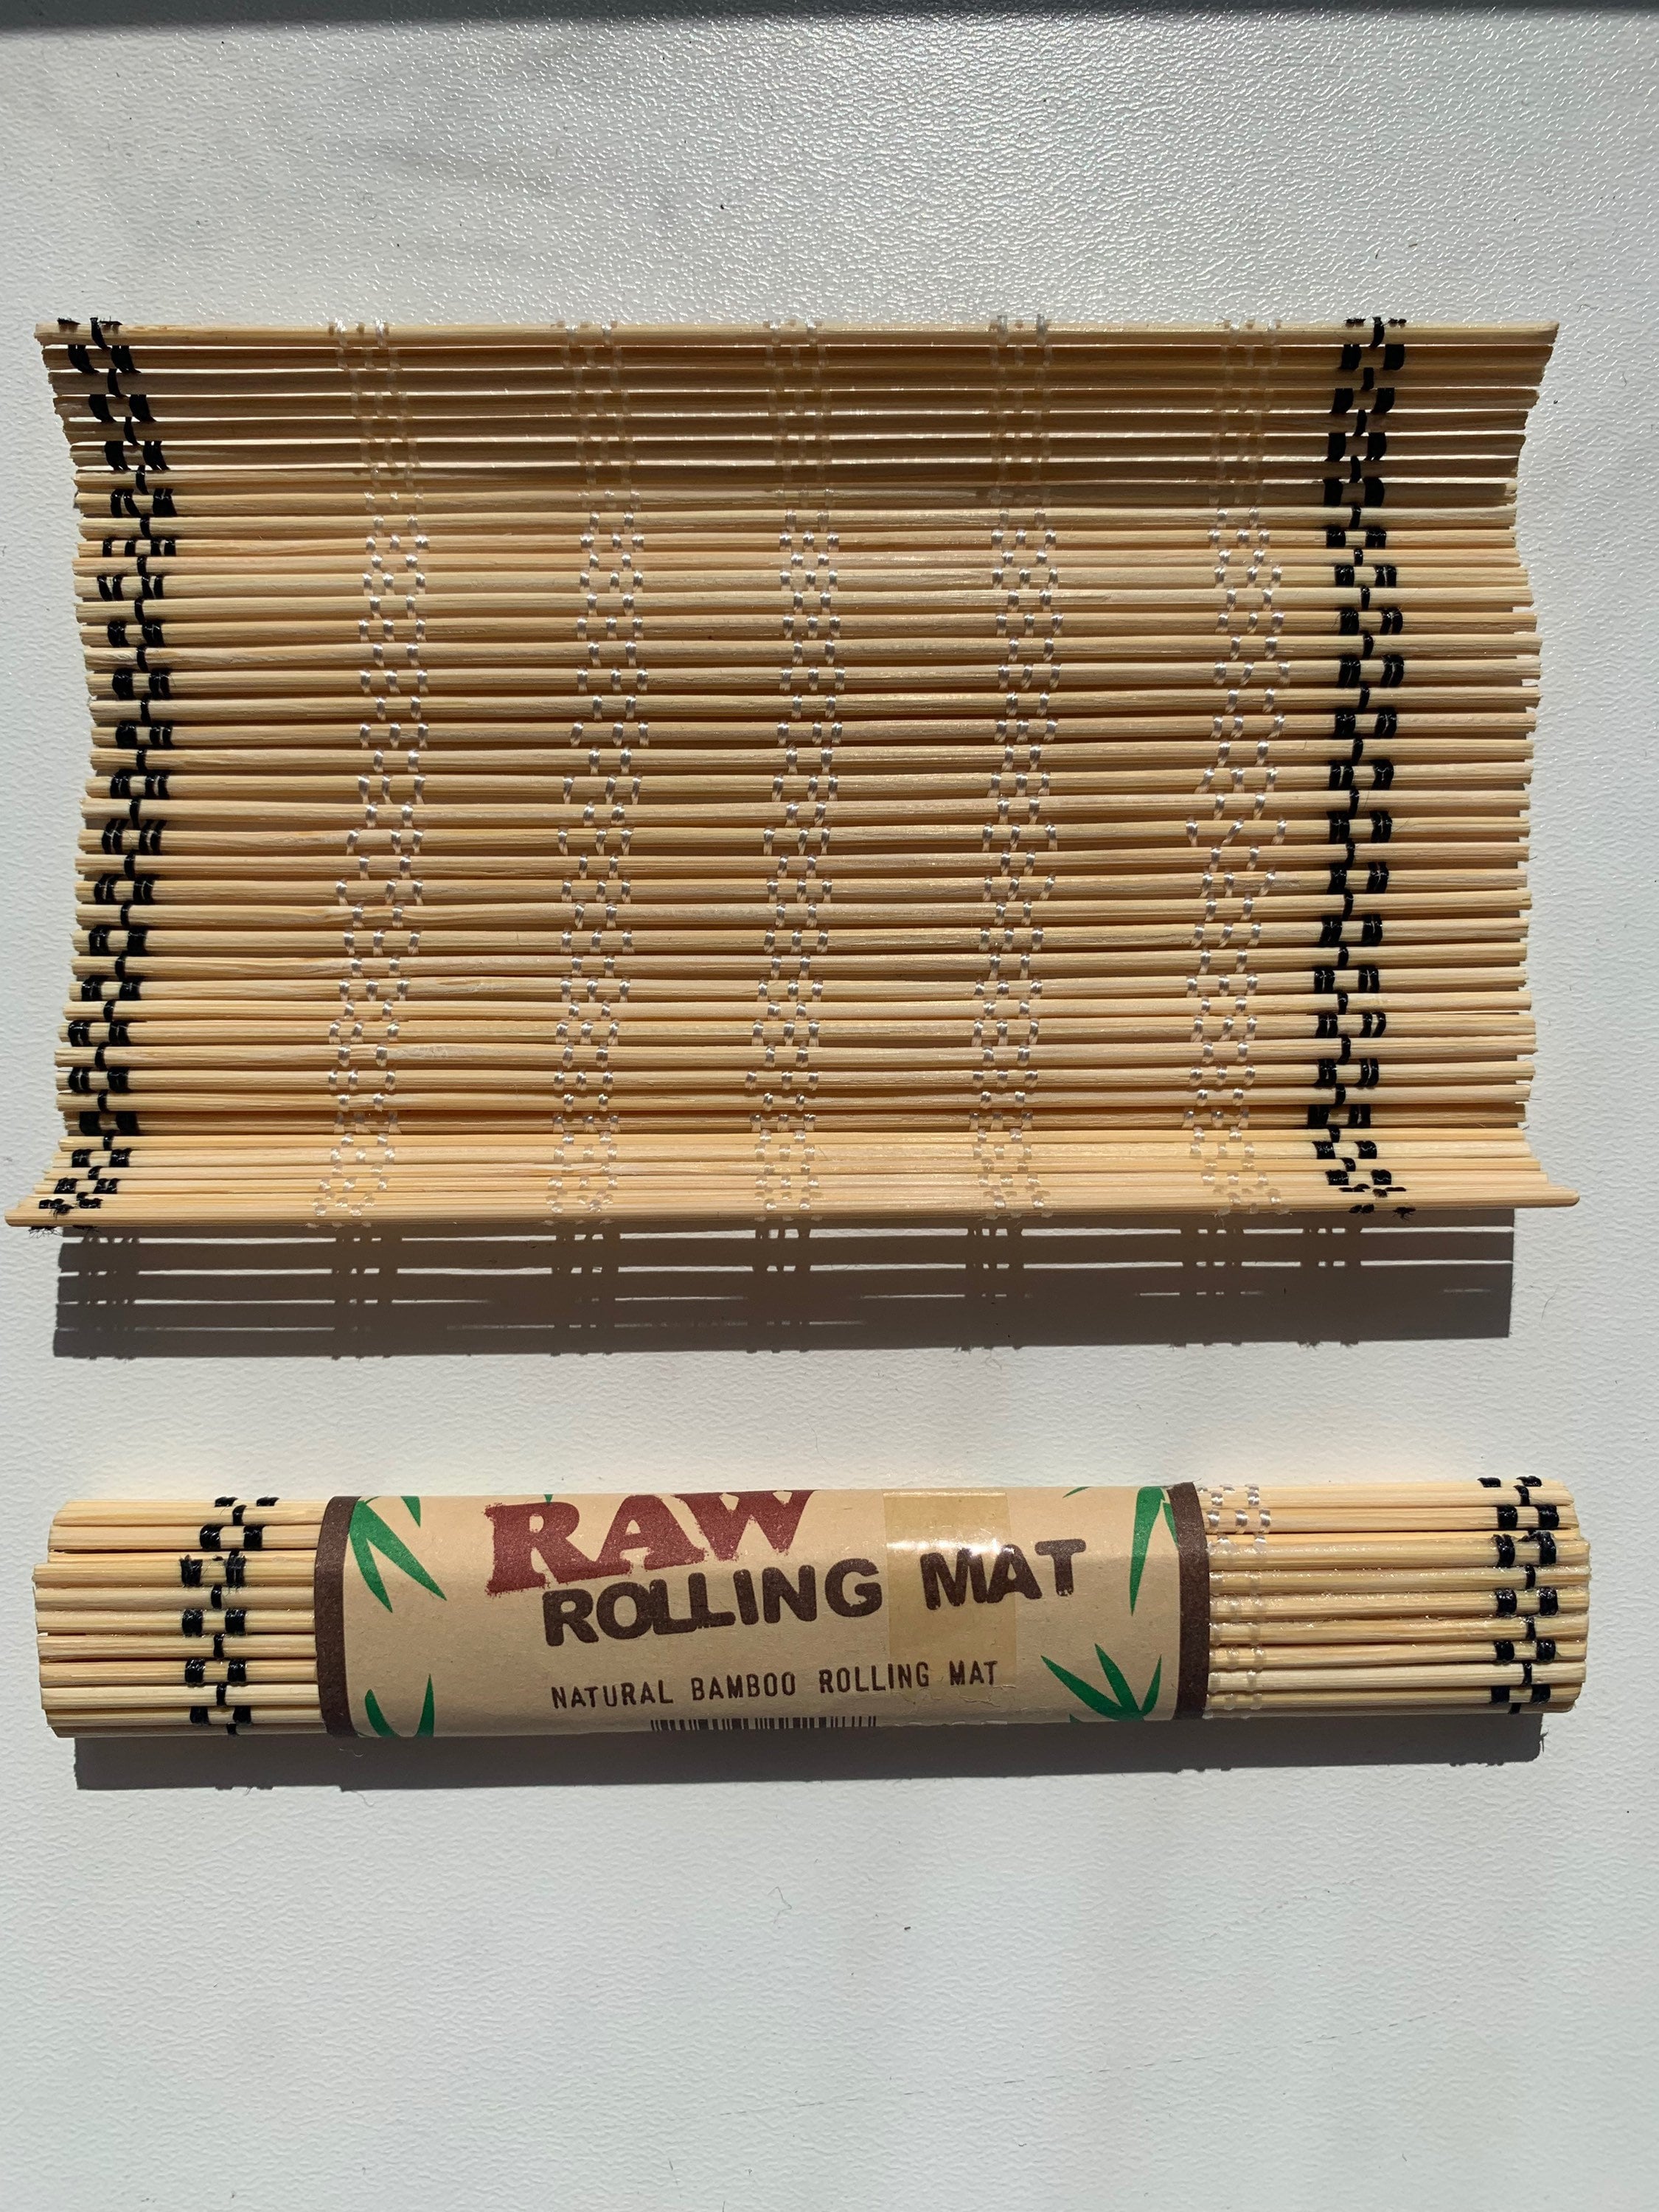 Raw Bamboo Rolling Mat Natural Cigarette / Joint Roller Machine Paper Roller